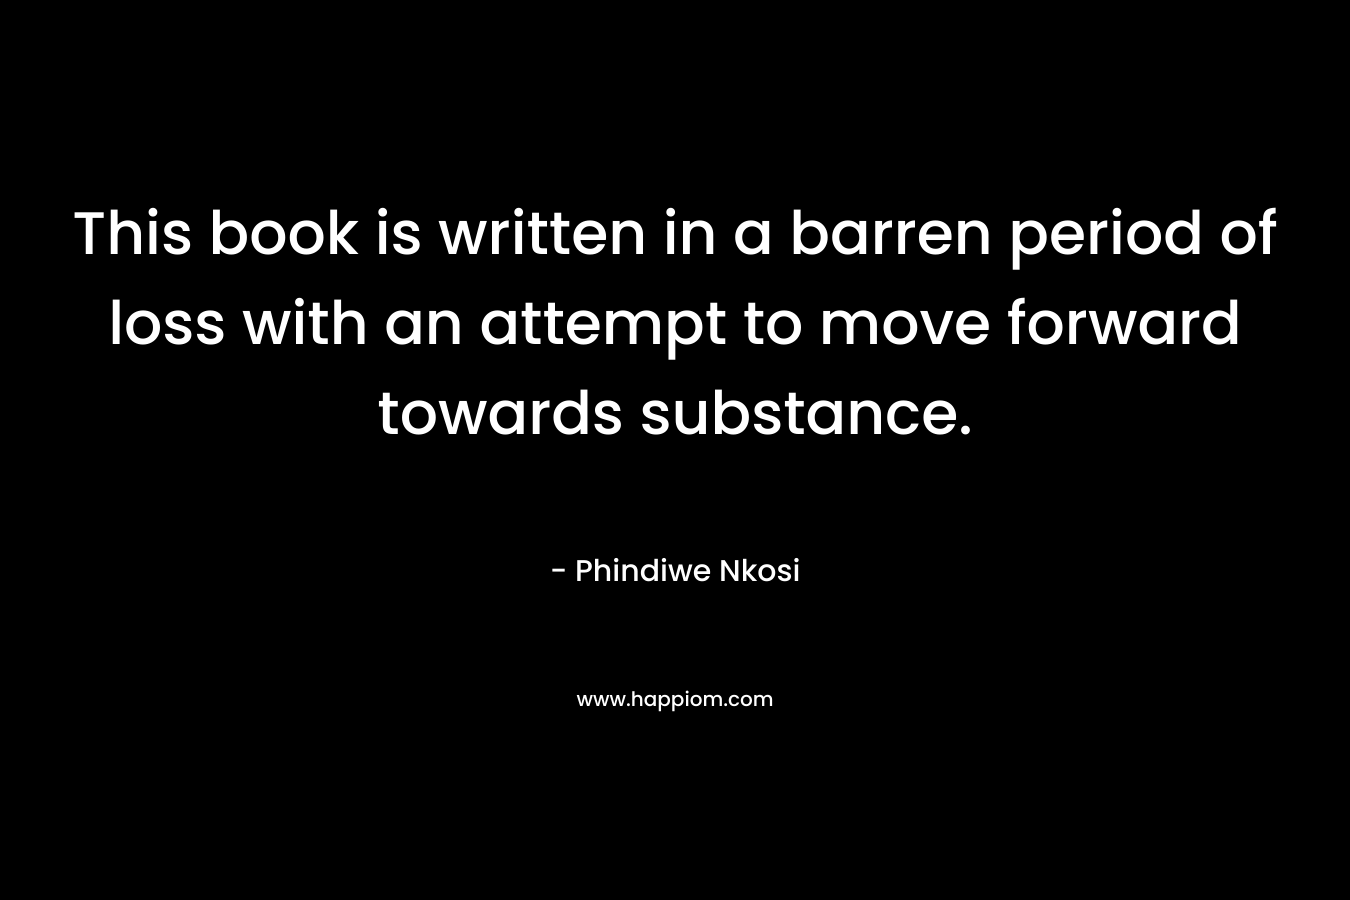 This book is written in a barren period of loss with an attempt to move forward towards substance.